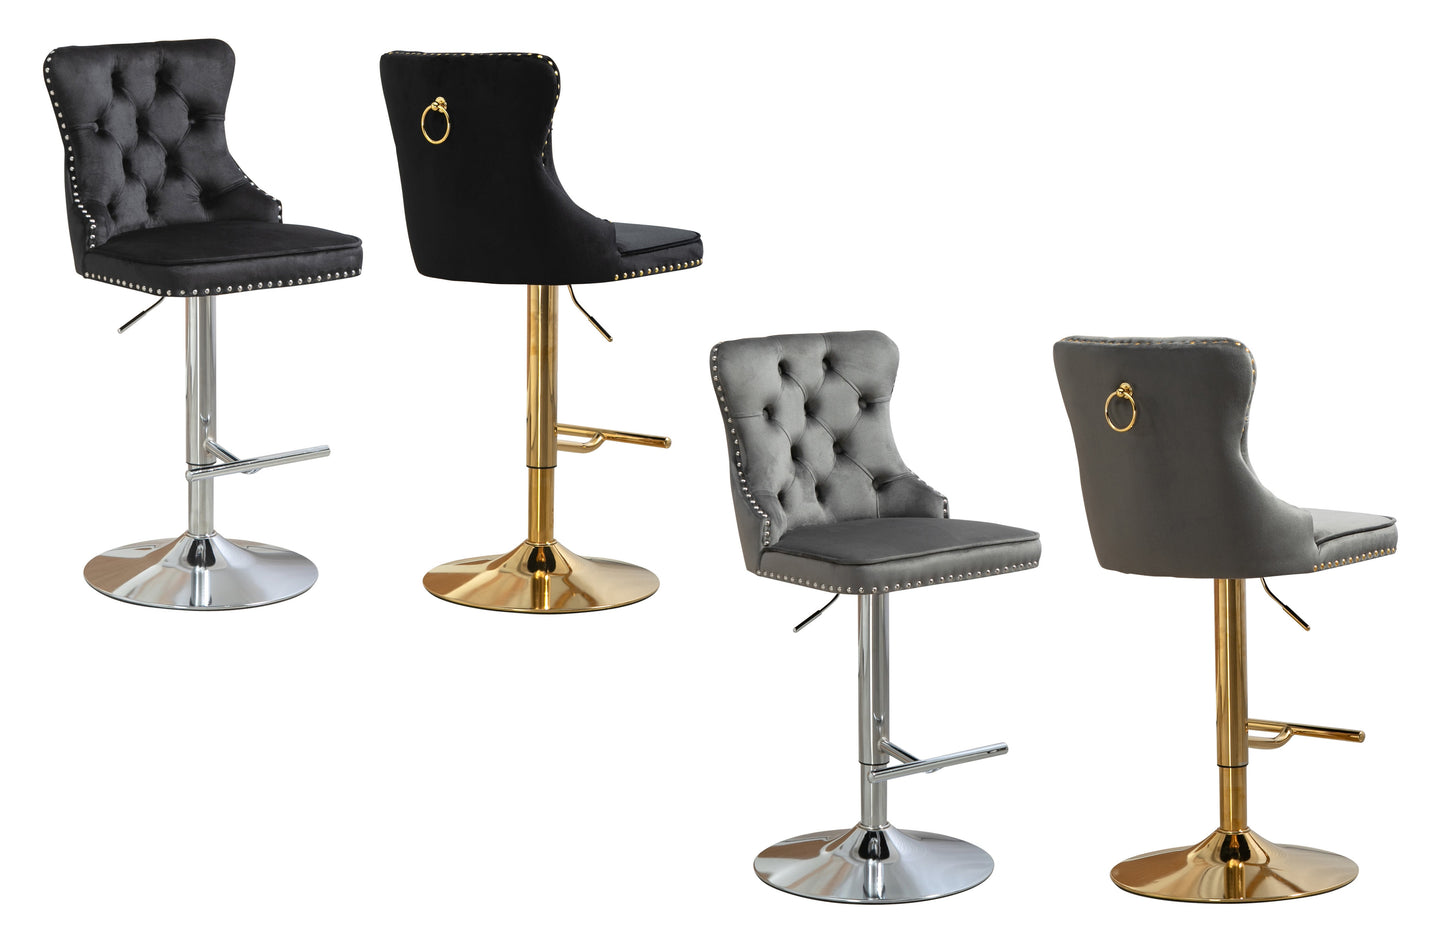 Sahara Tufted Height Adjustable Swivel Bar Stools with Footrest - 3 Colours Available